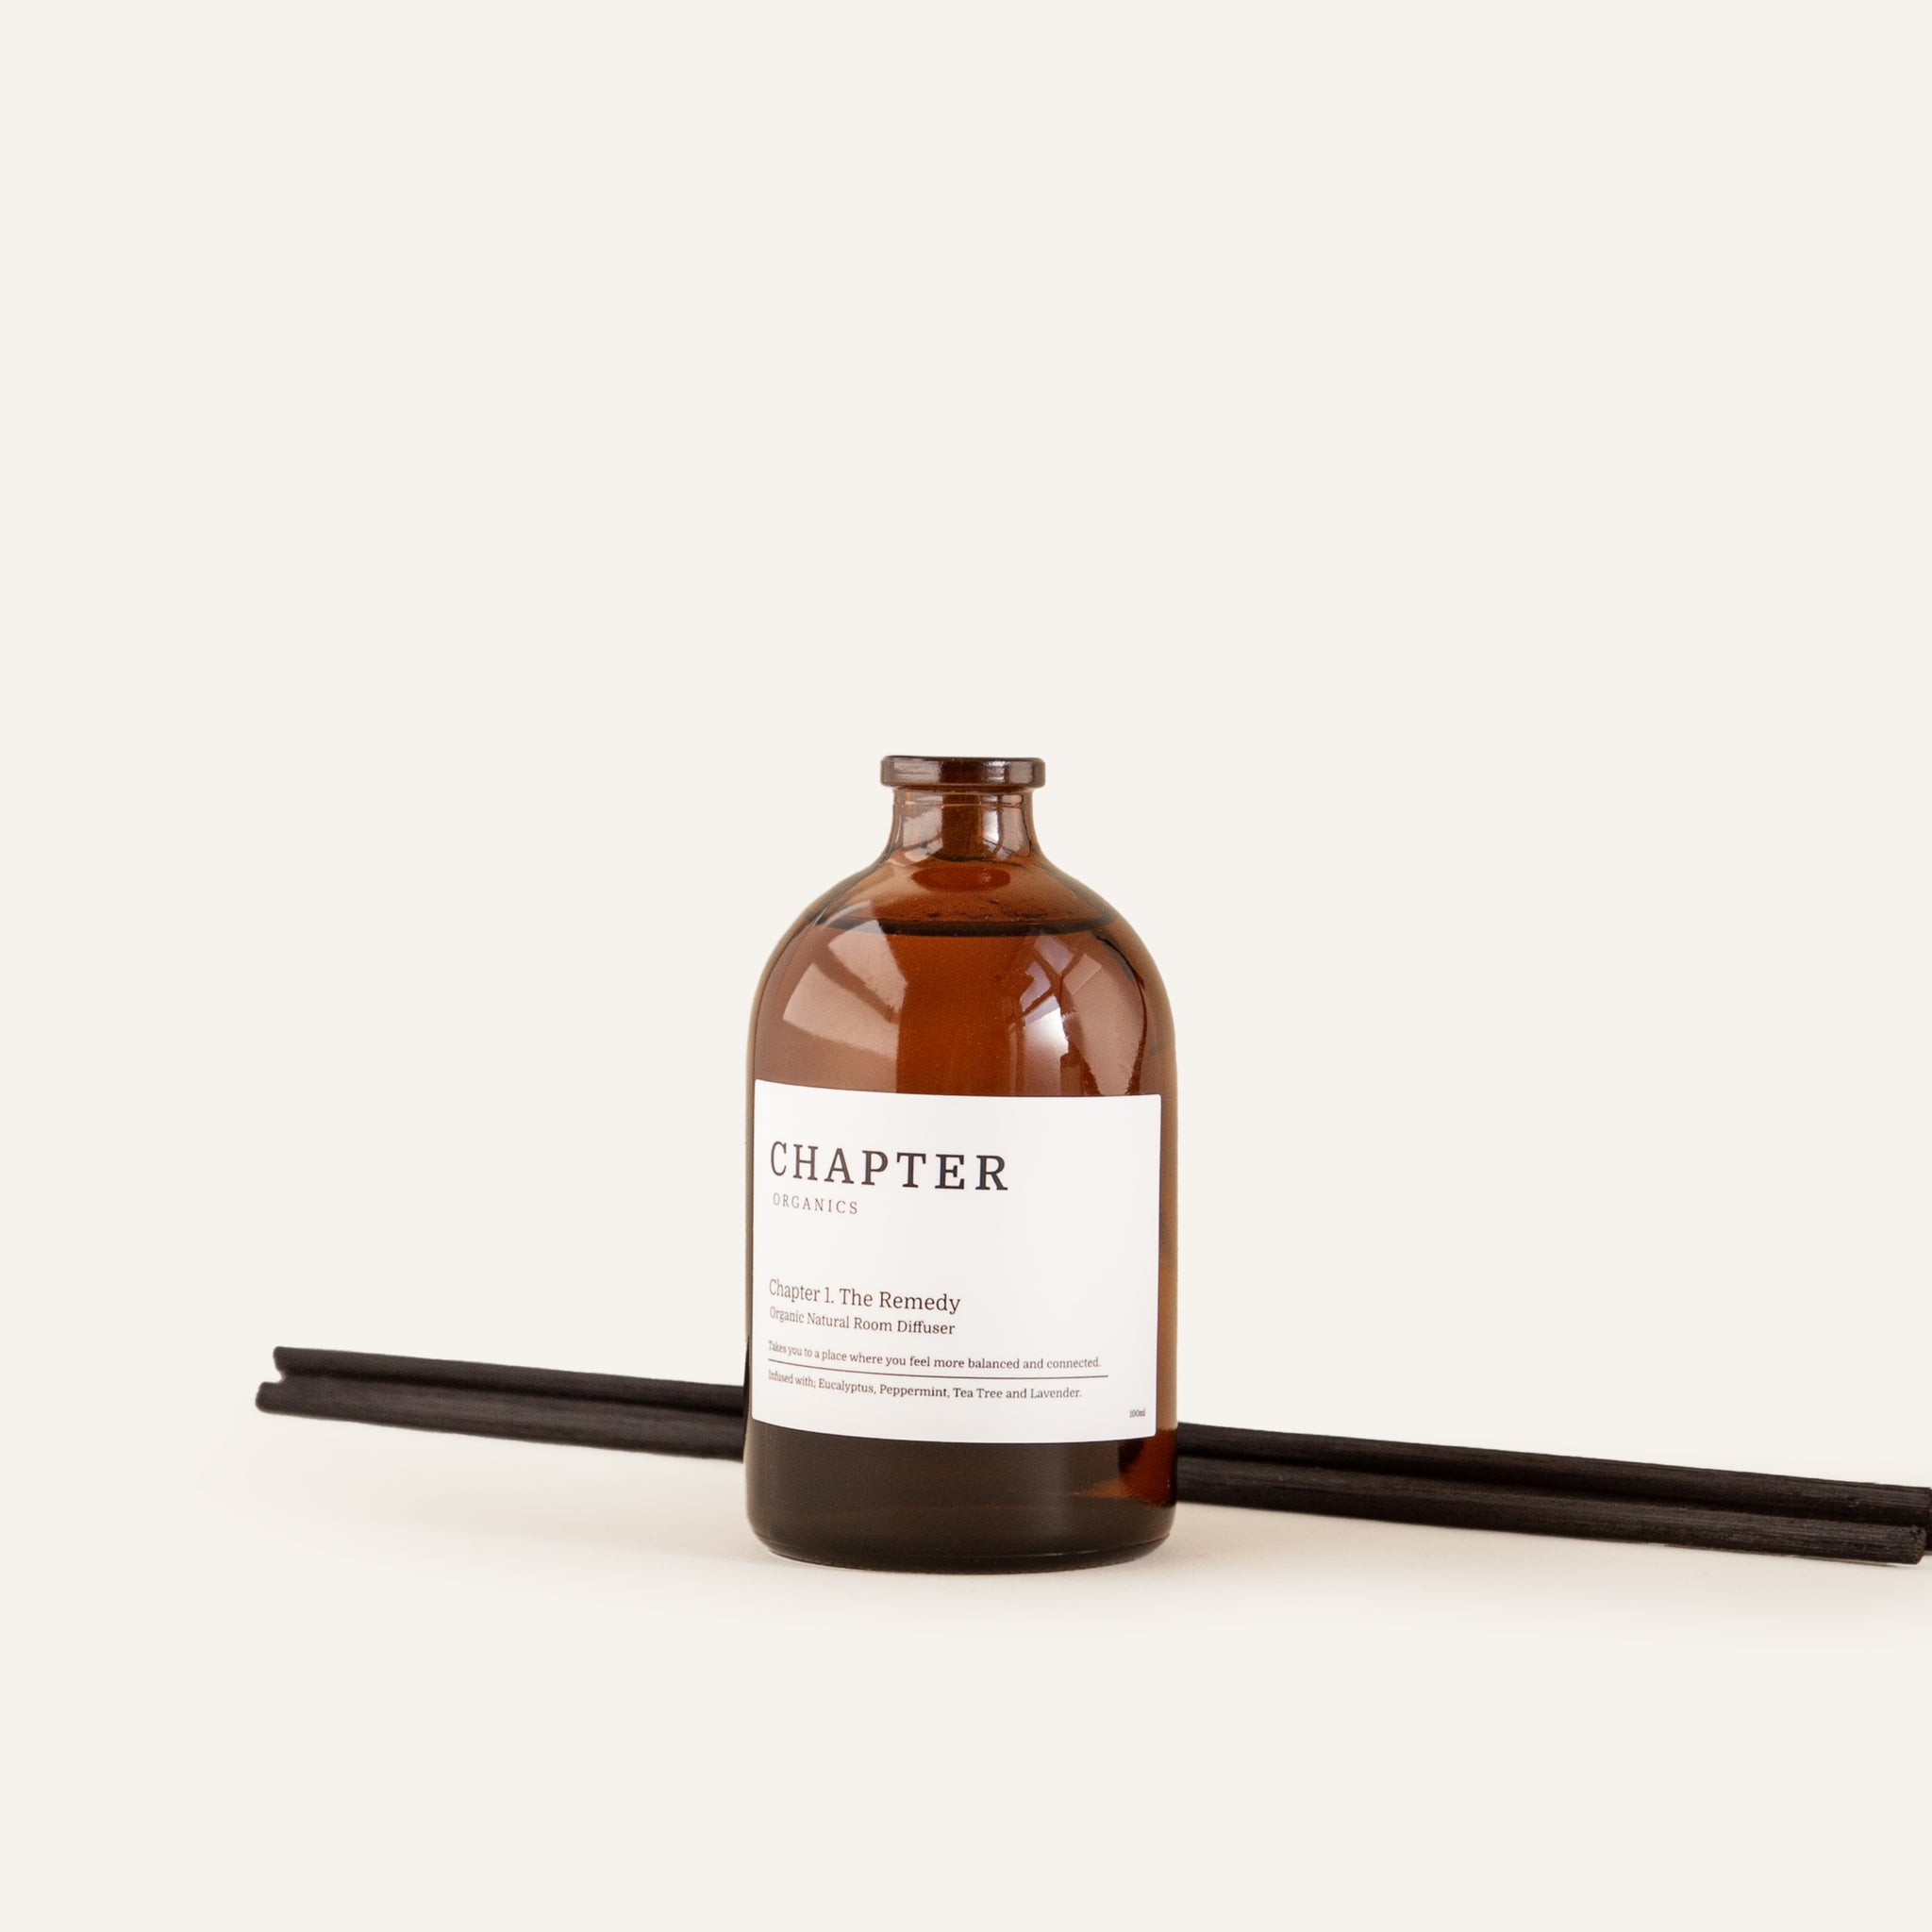 The Clarity Room Diffuser 100ml